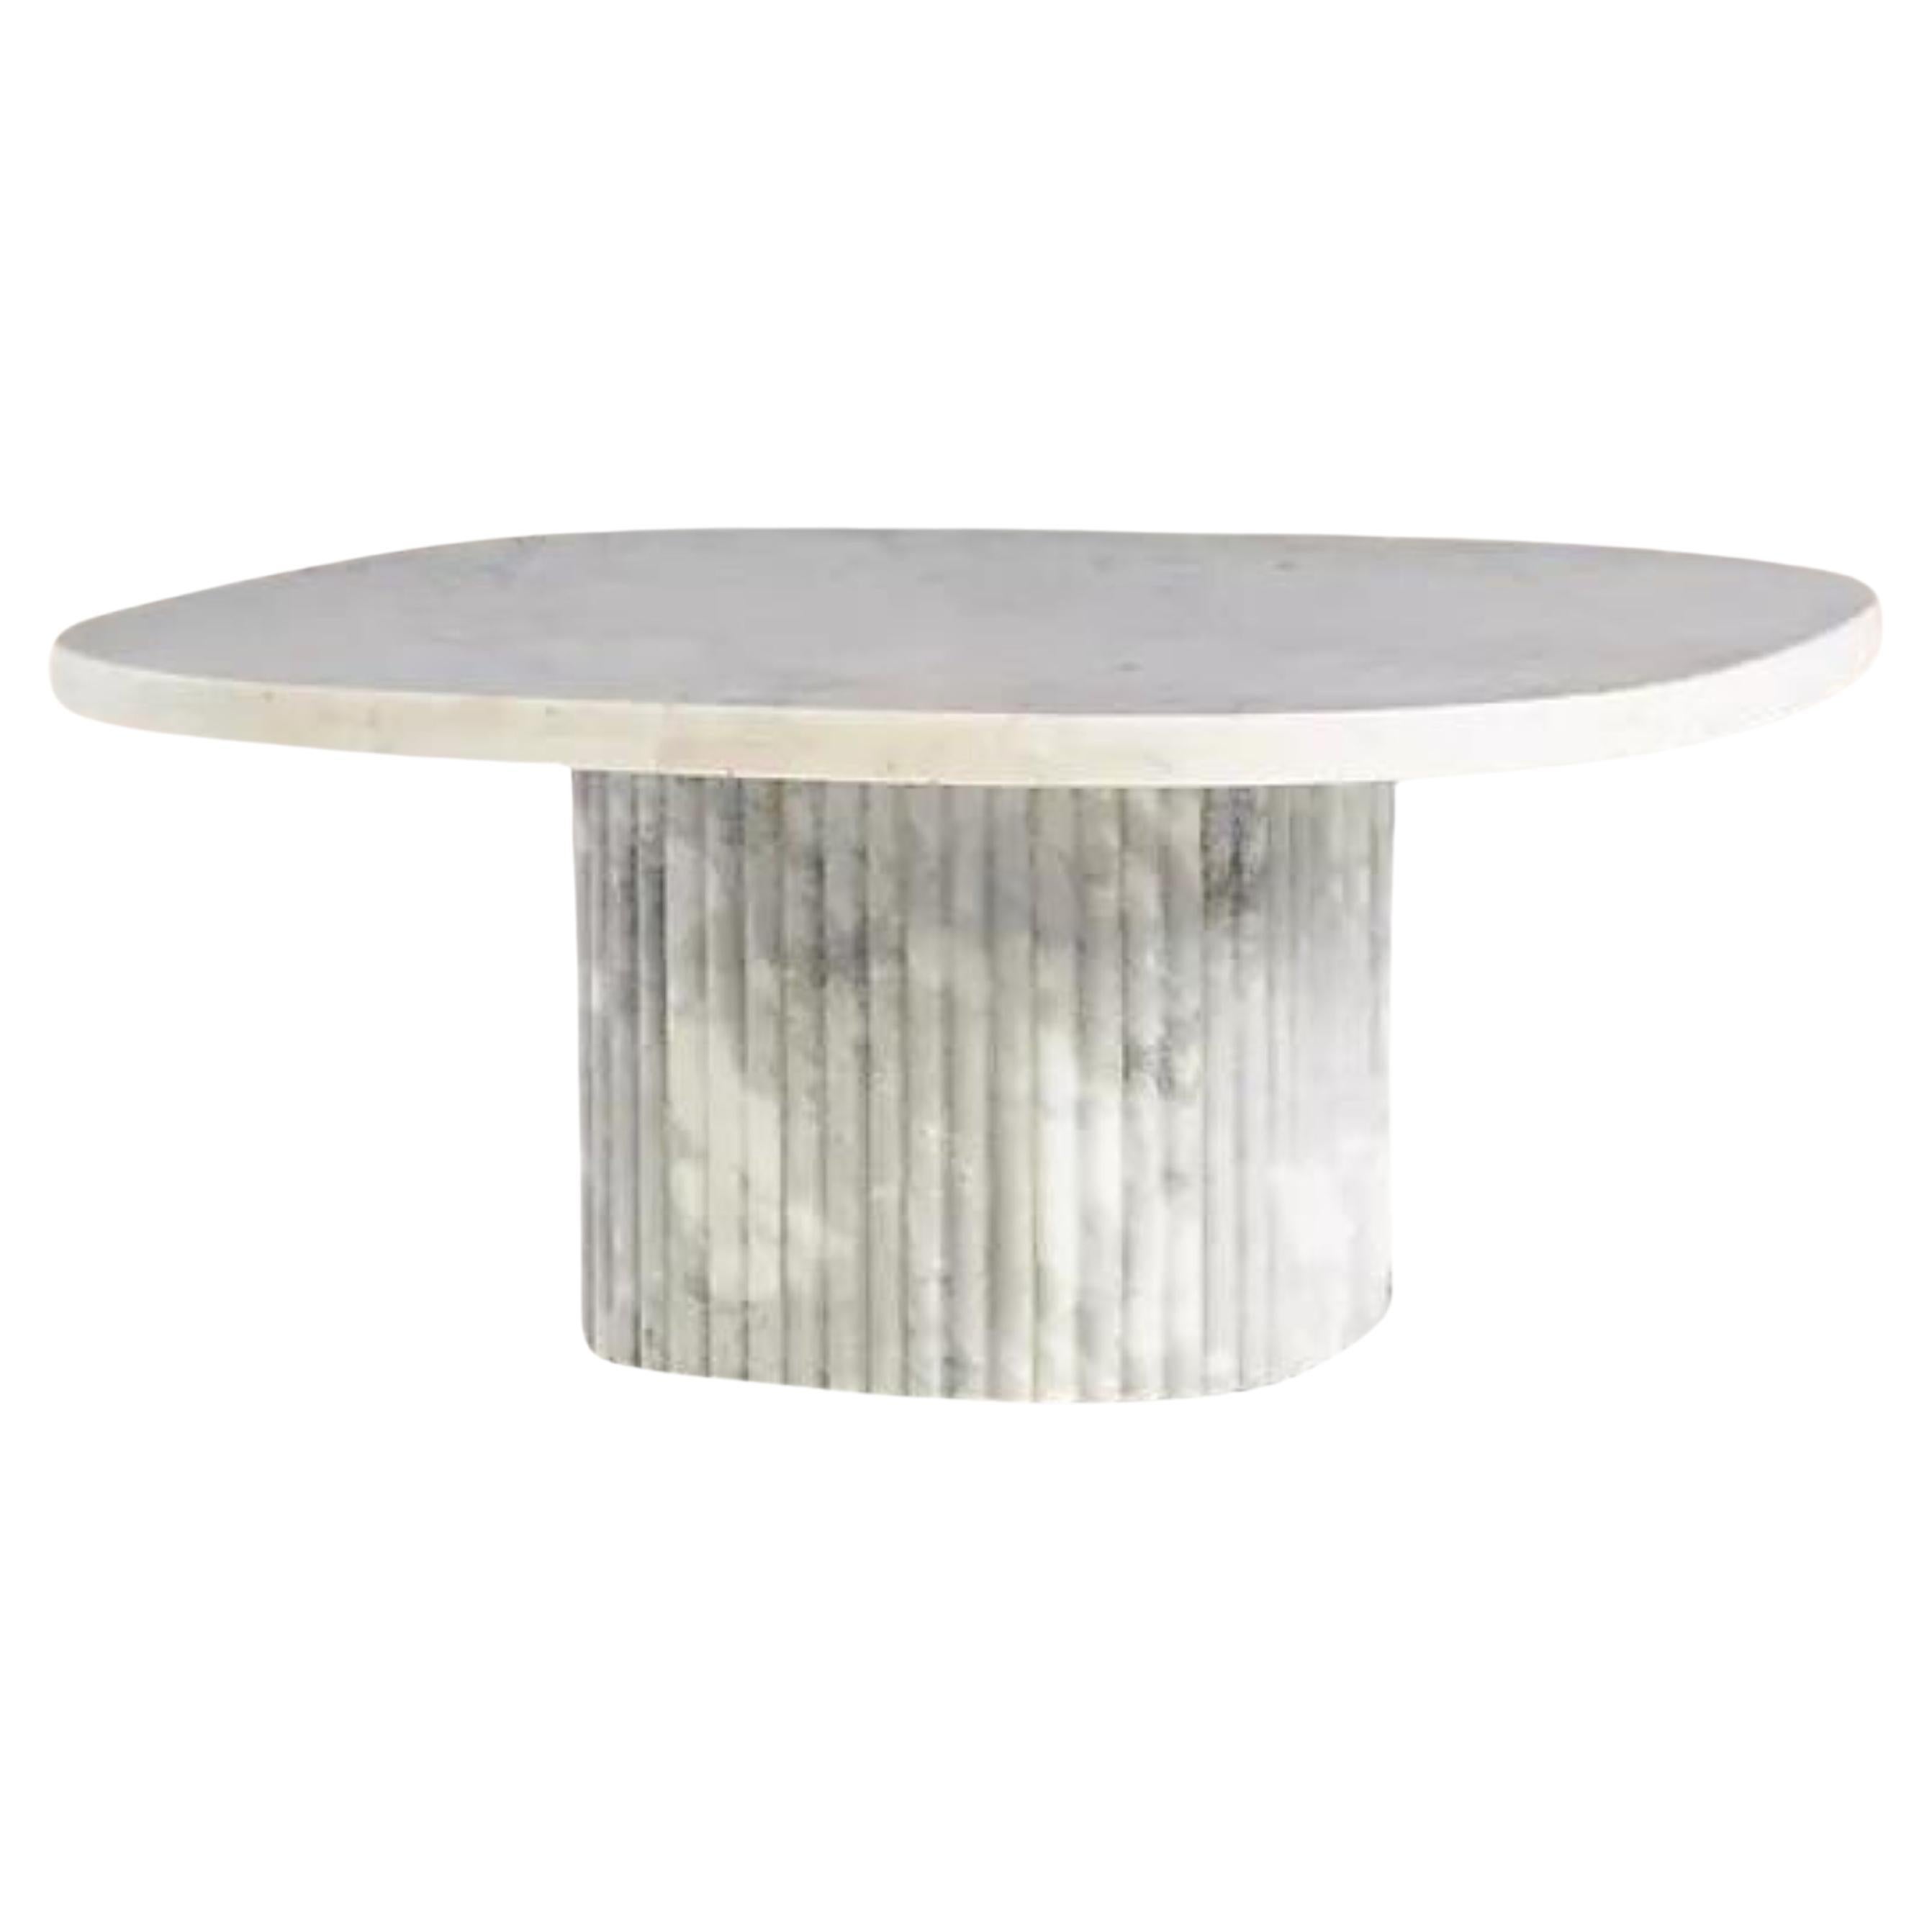 Marmo Nest of Table – Groß im Angebot